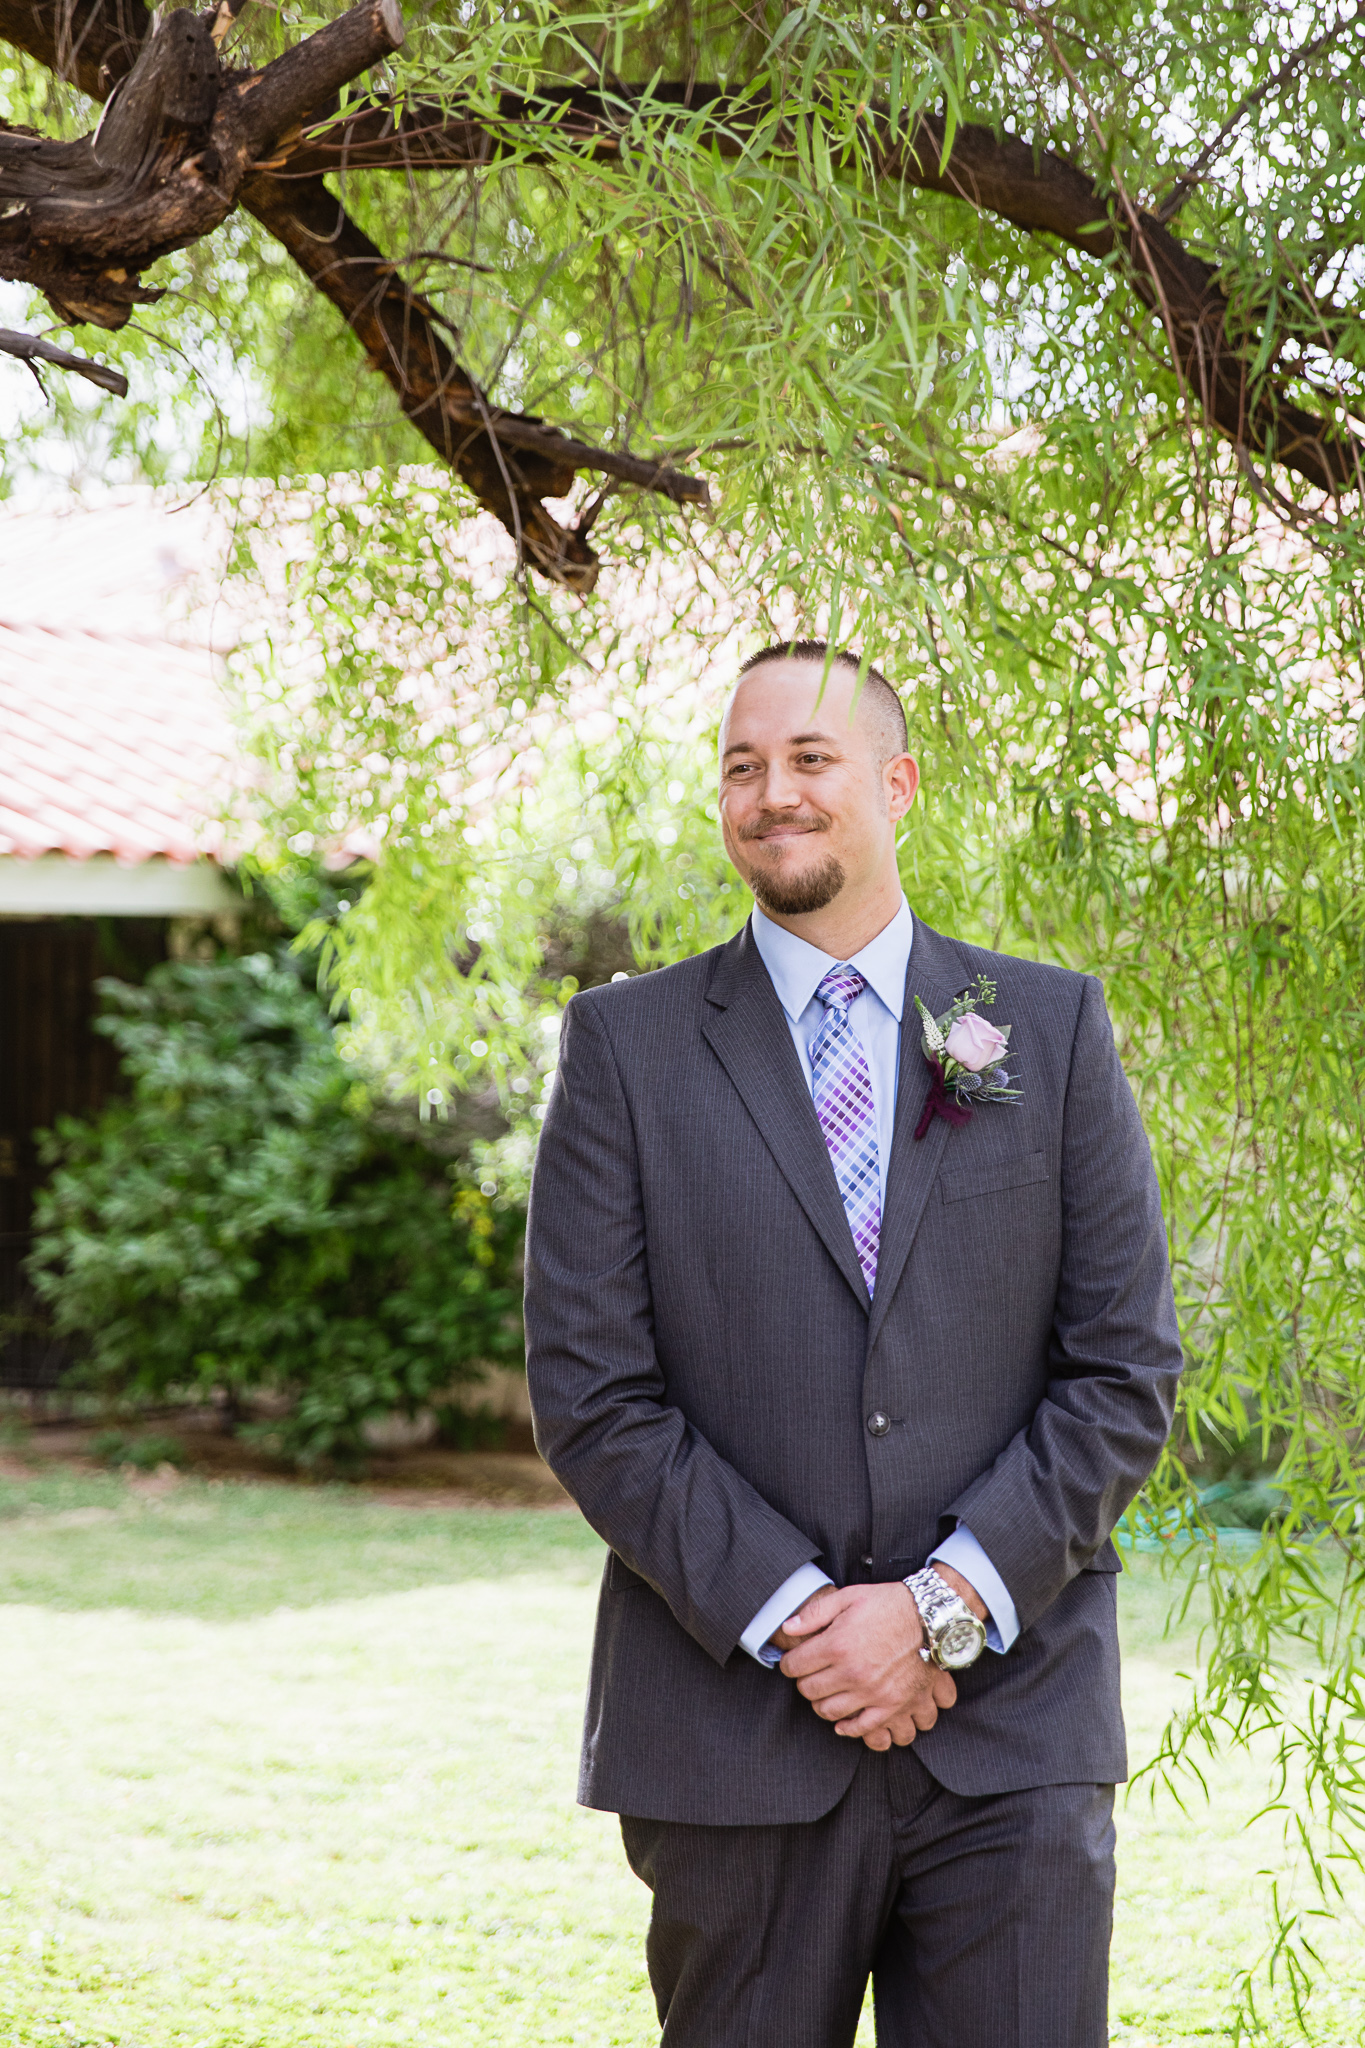 Bride and groom's first look on their wedding day by Arizona wedding photographer PMA Photography.